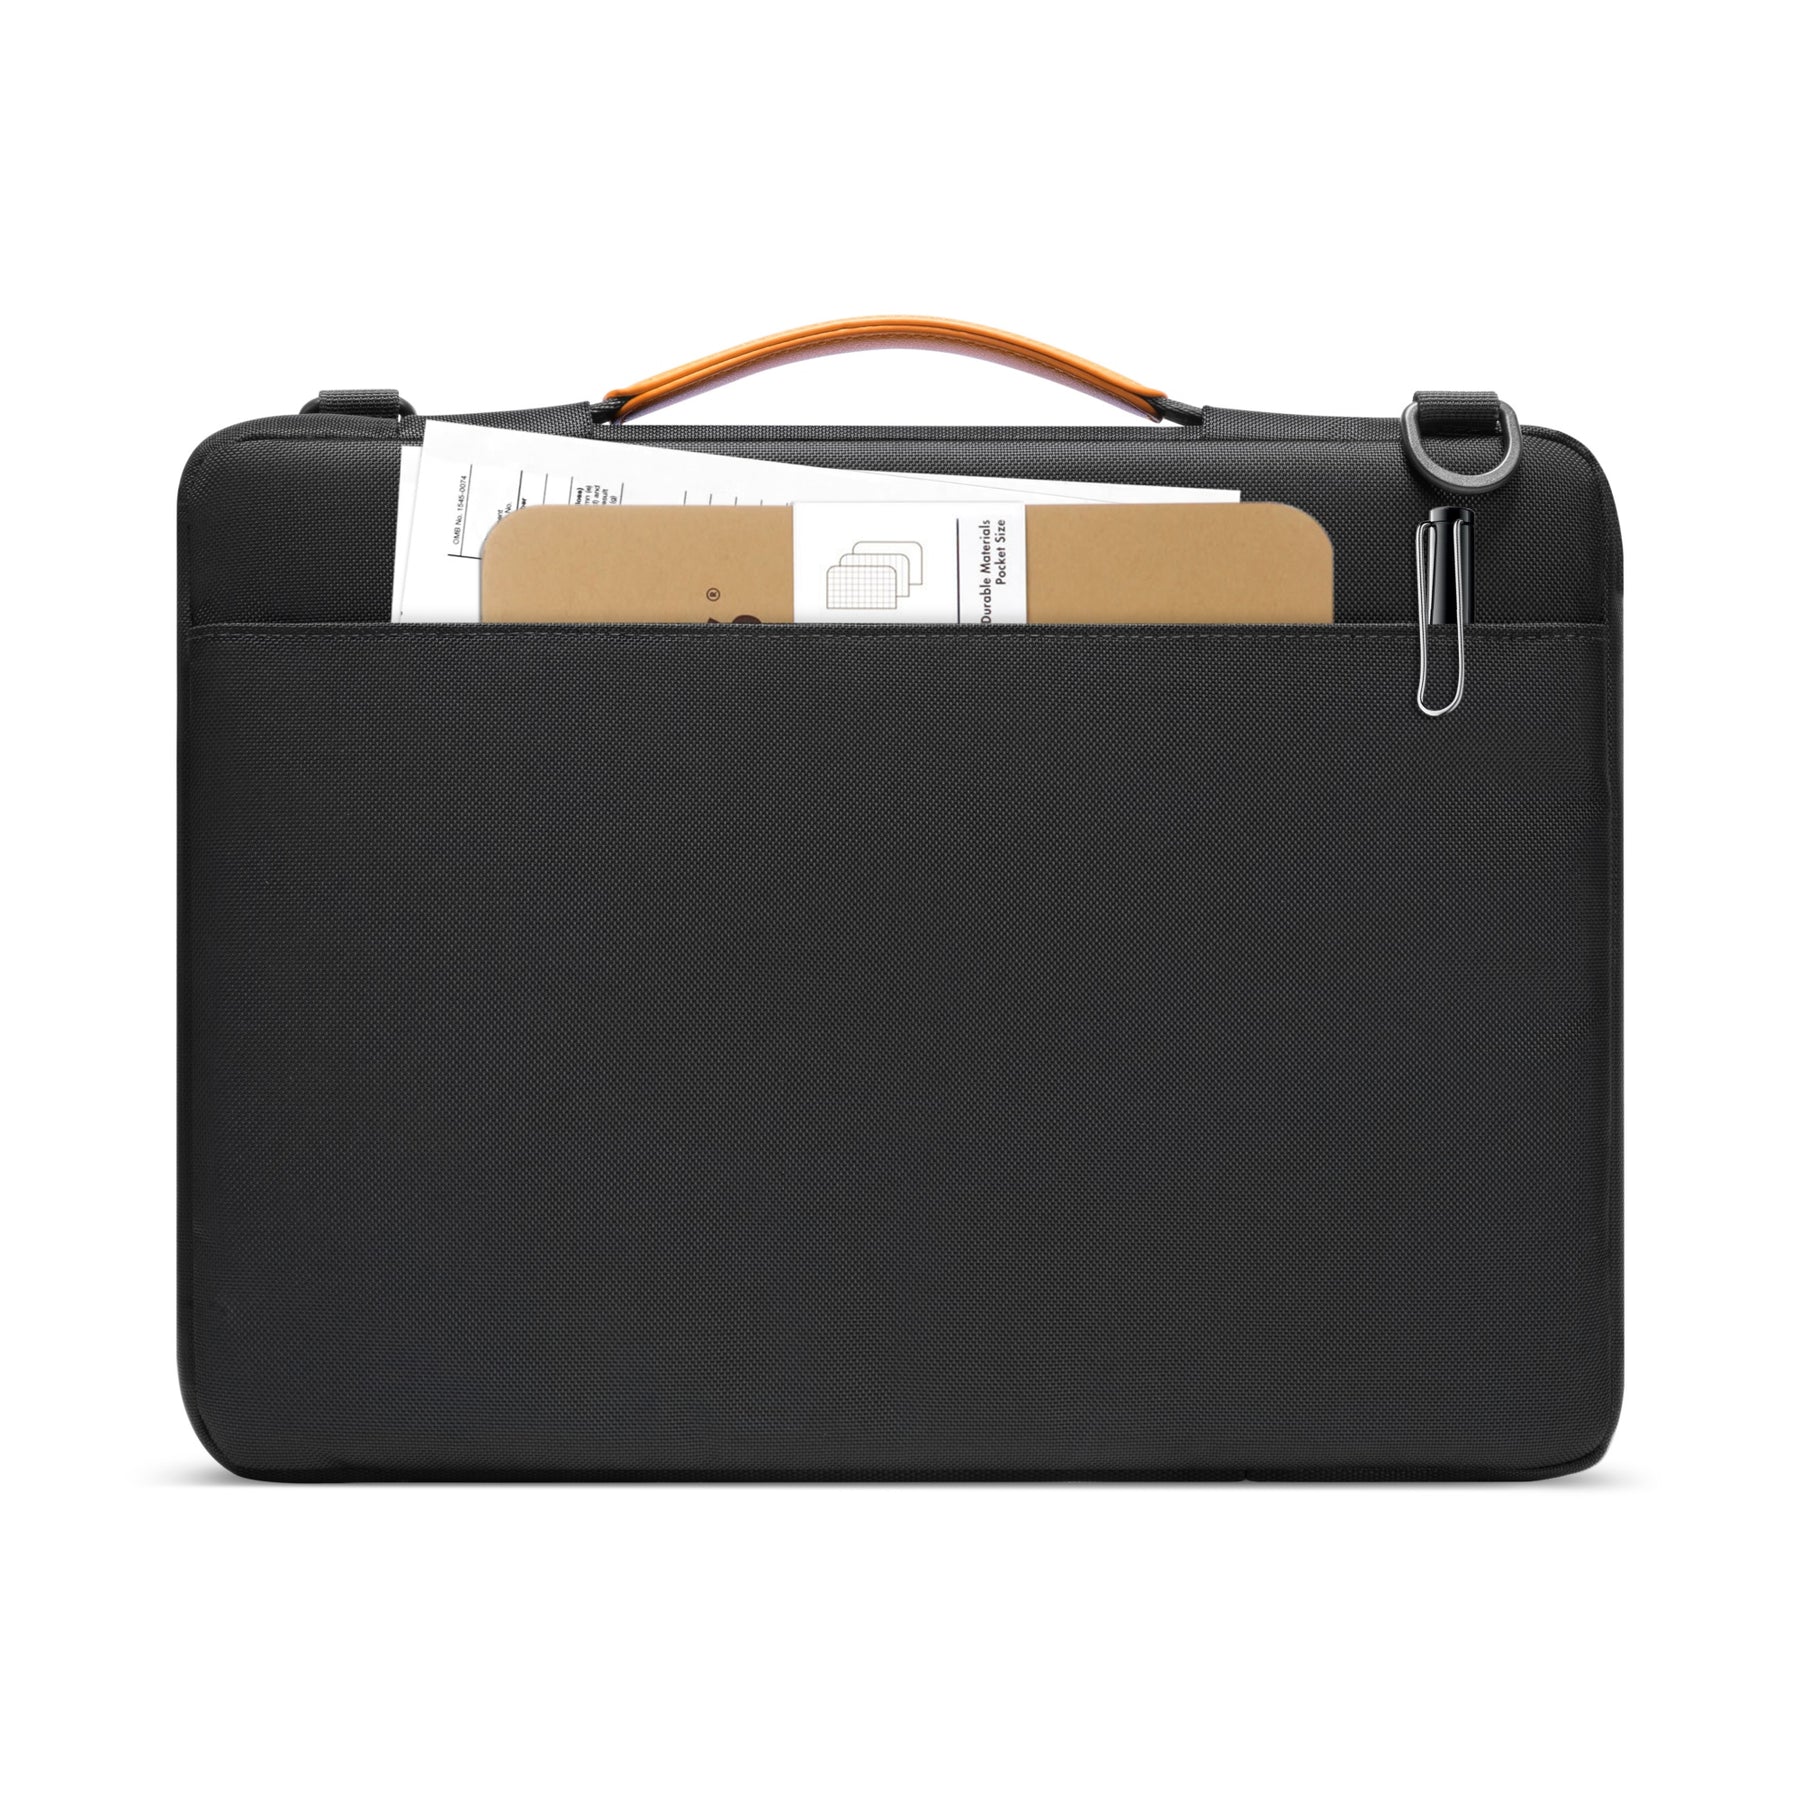 Universal Laptop Bag Sleeve 11 12 13 14 15 Inch for Macbook Air 13 Portable  Briefcase Notebook Pouch HP Huawei Xiaomi Cover